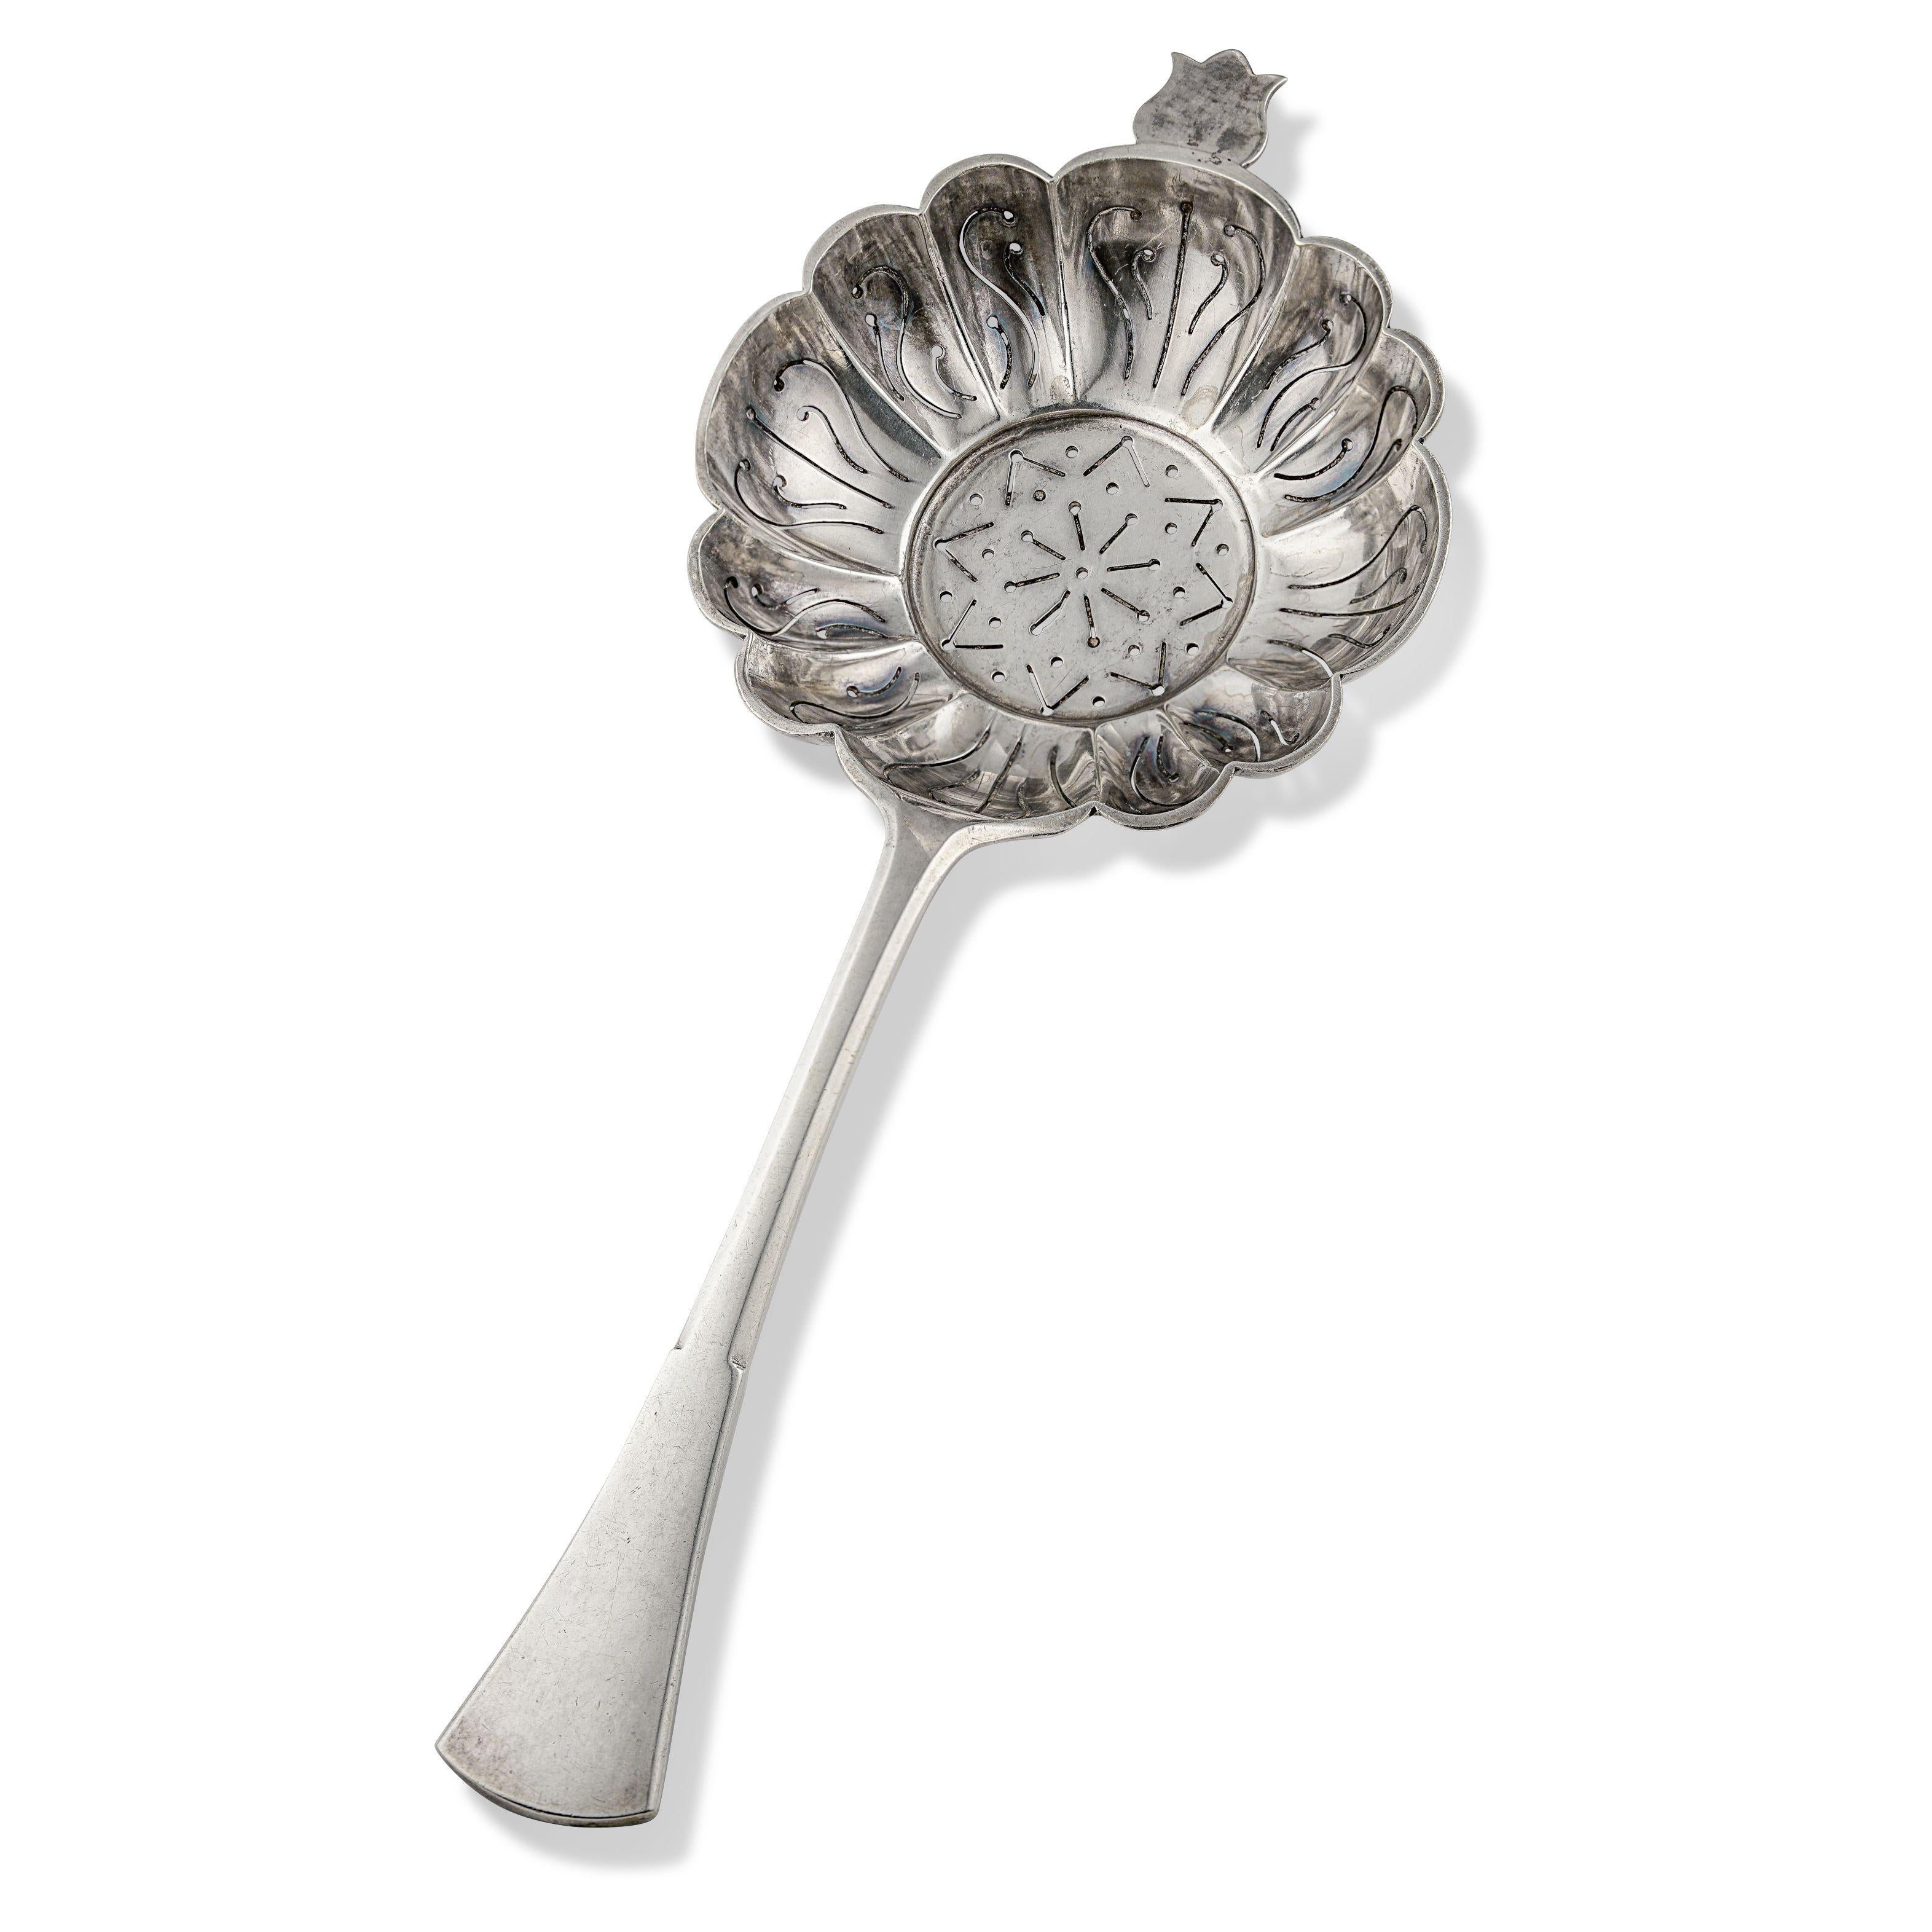 Hand-Crafted Antique Continental Silver Sugar Sifter Berry Serving Spoon Austria